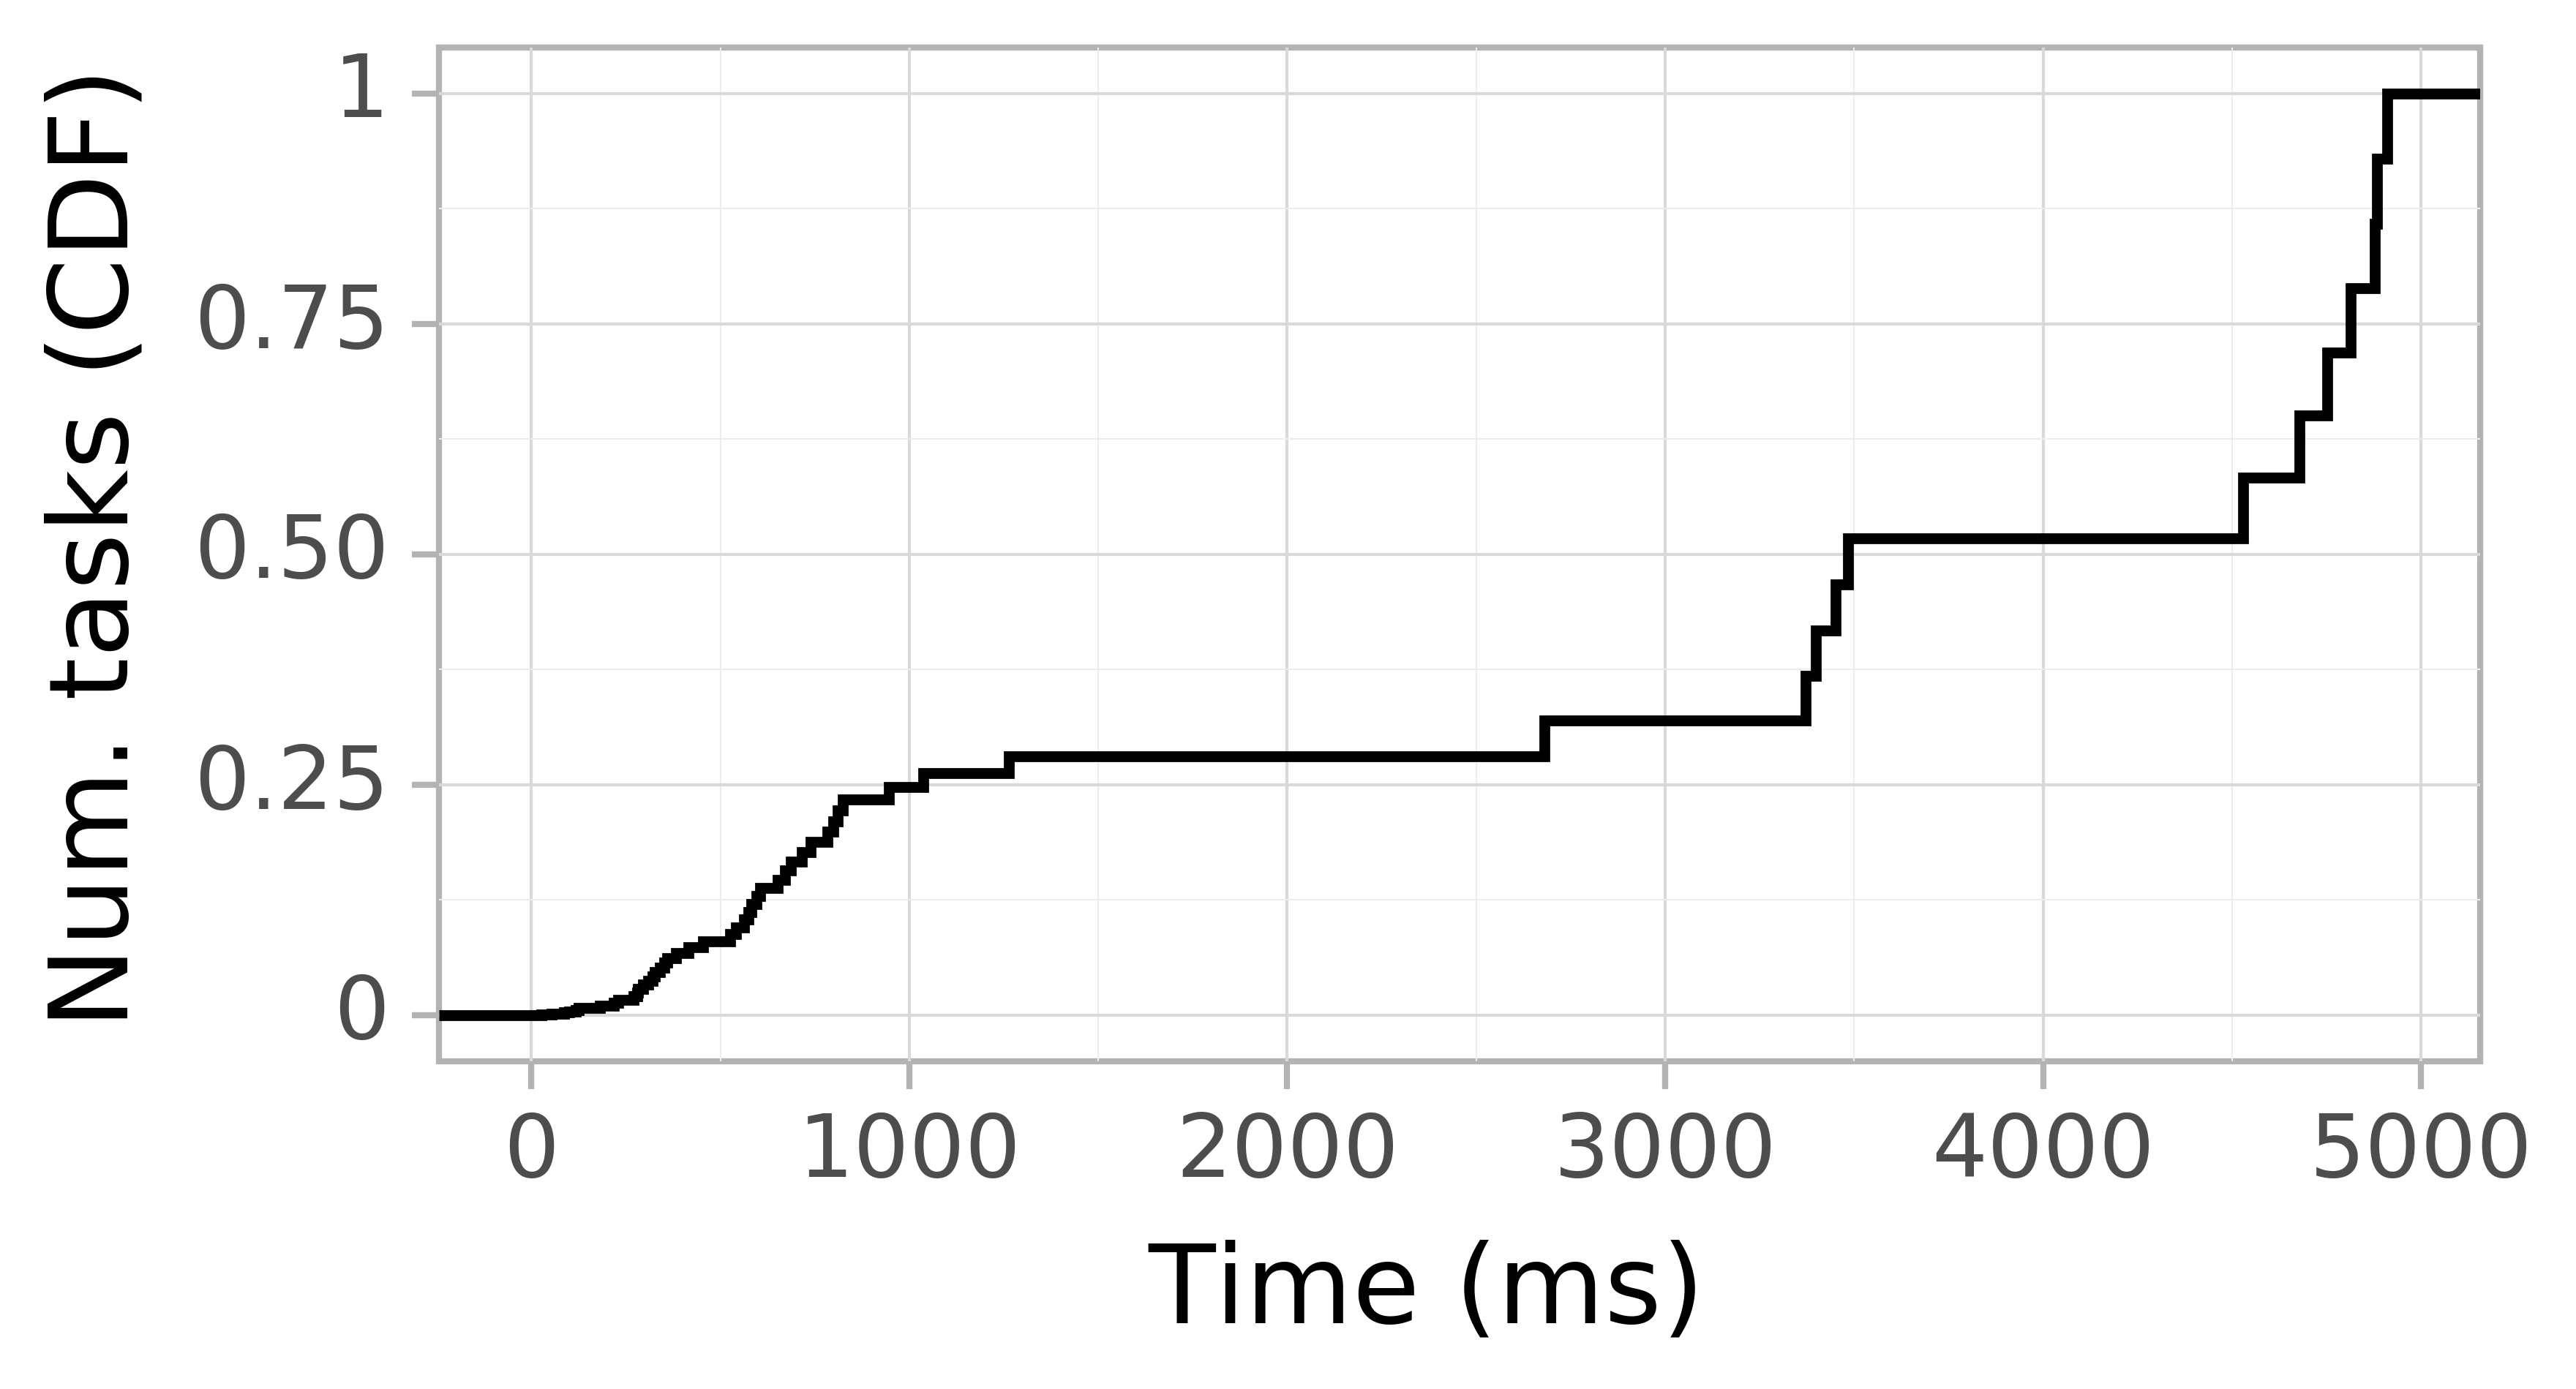 Task arrival CDF graph for the Pegasus_P5 trace.